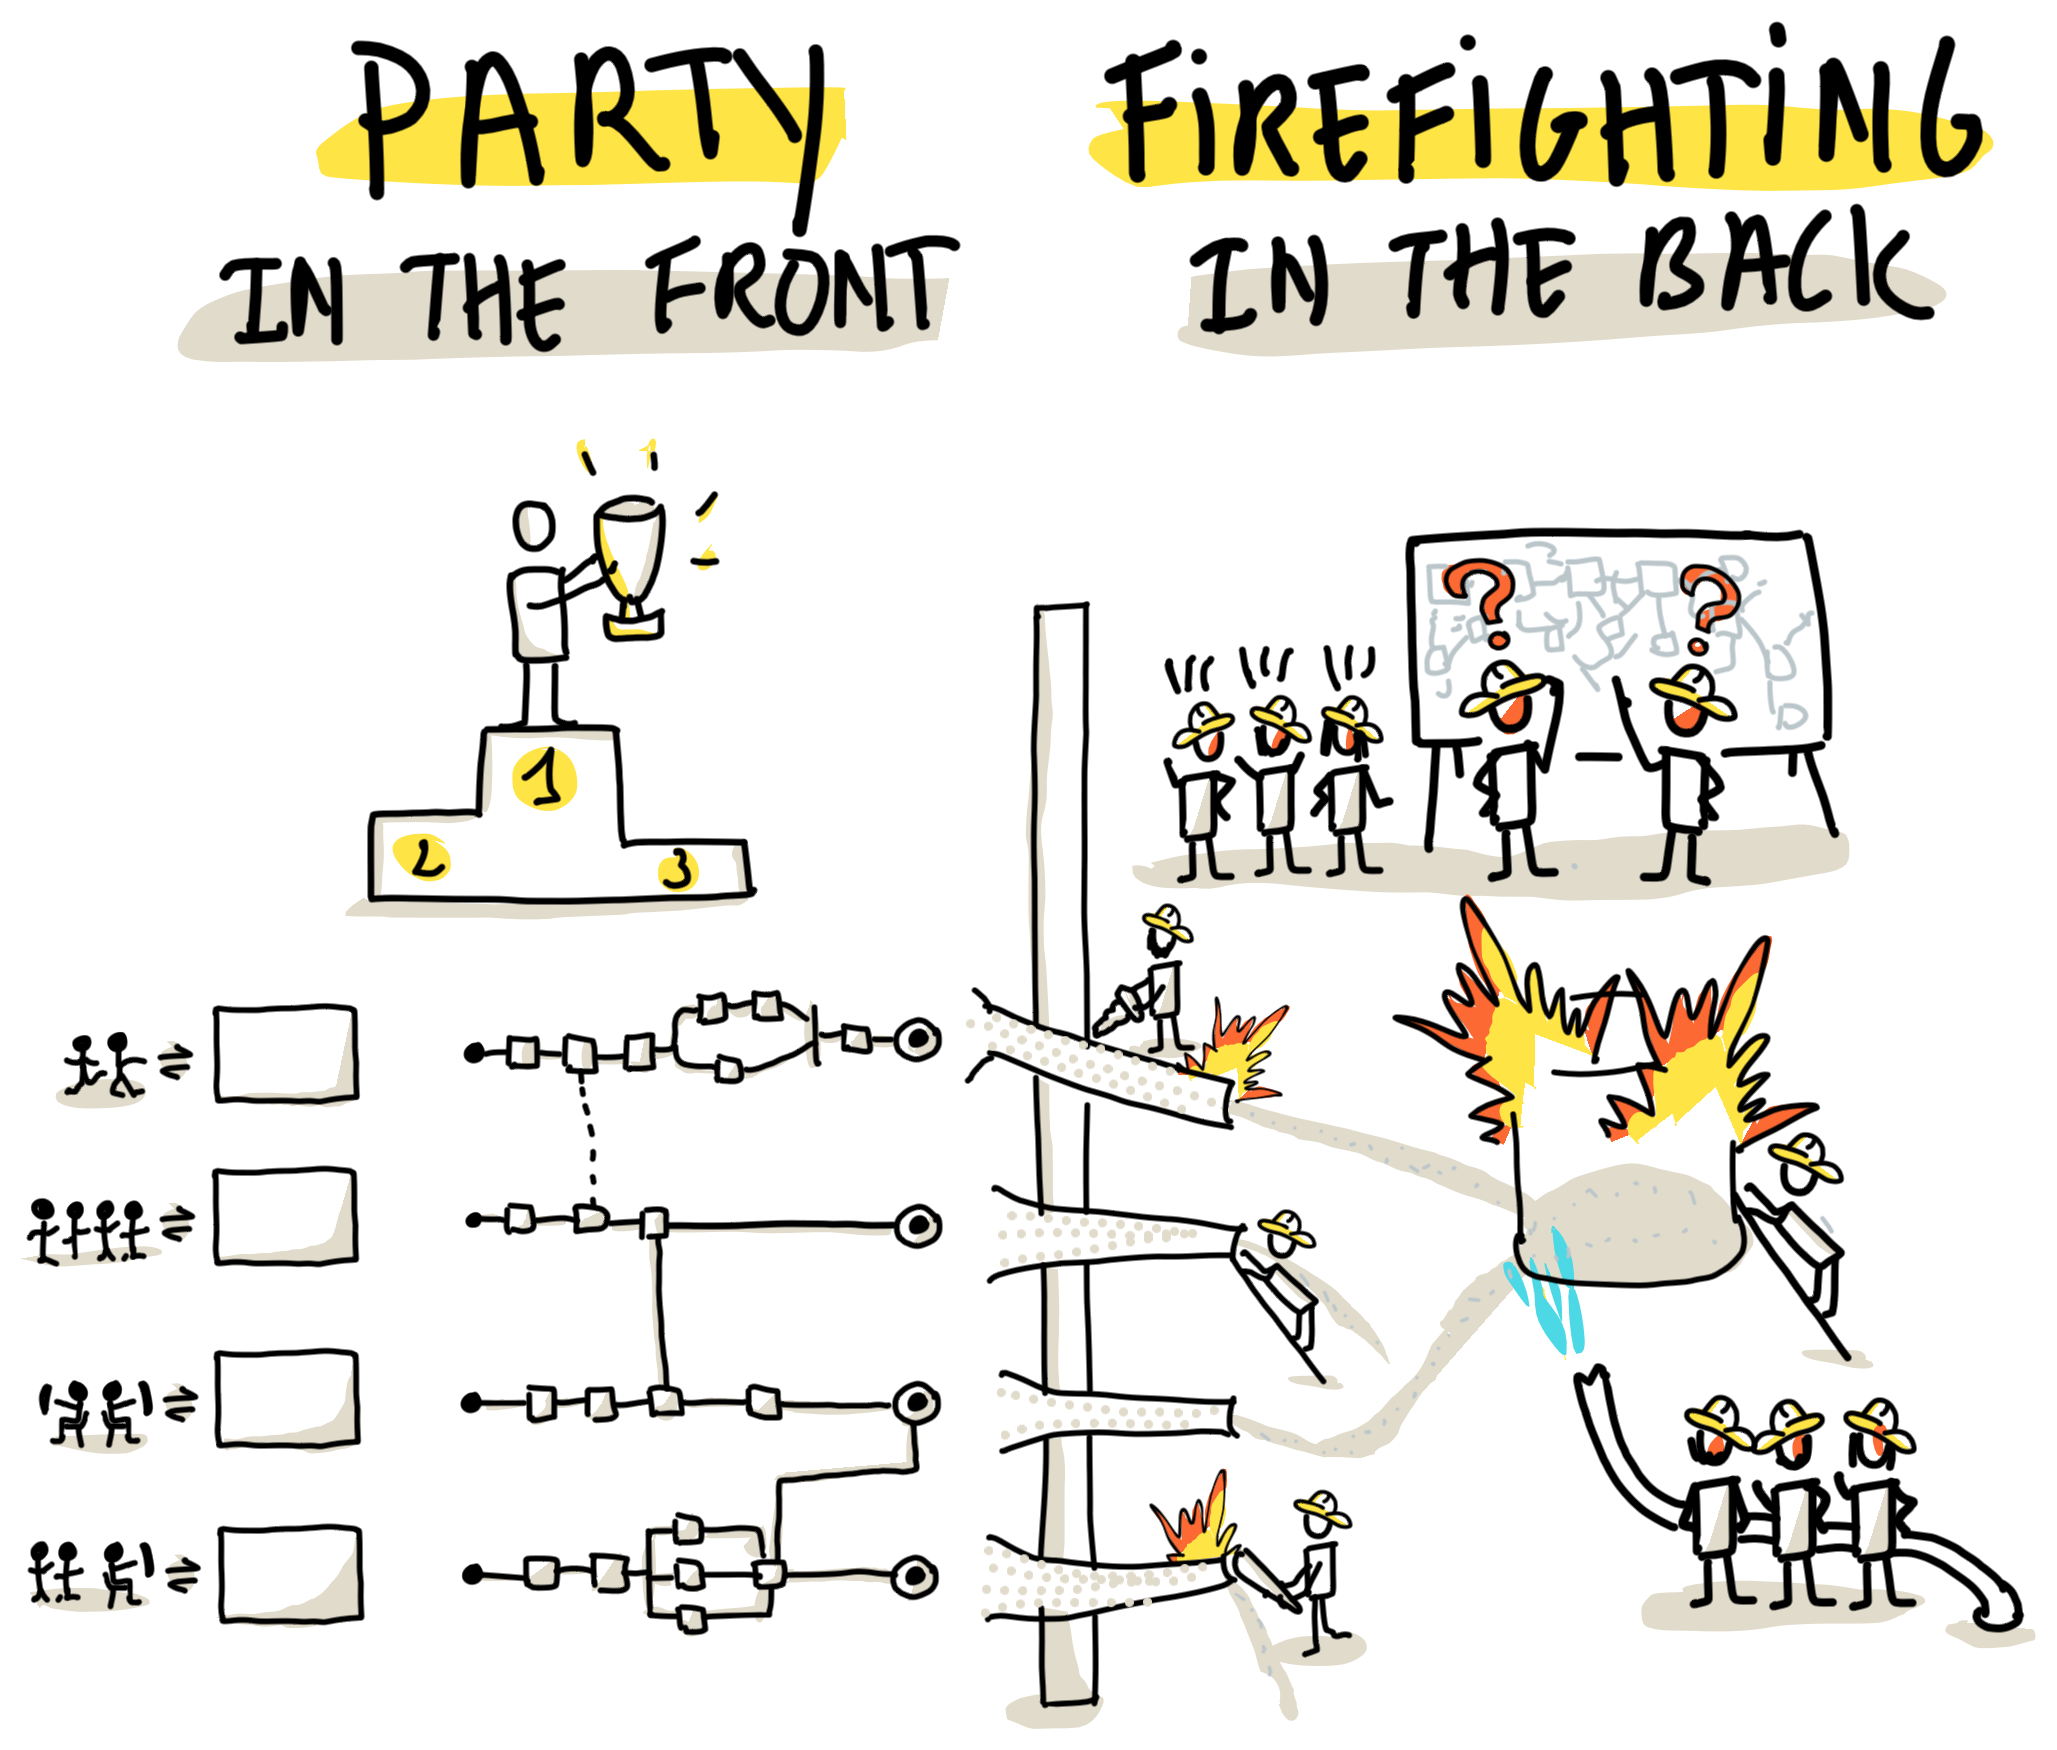 Party in the Front, Firefighting in the Back